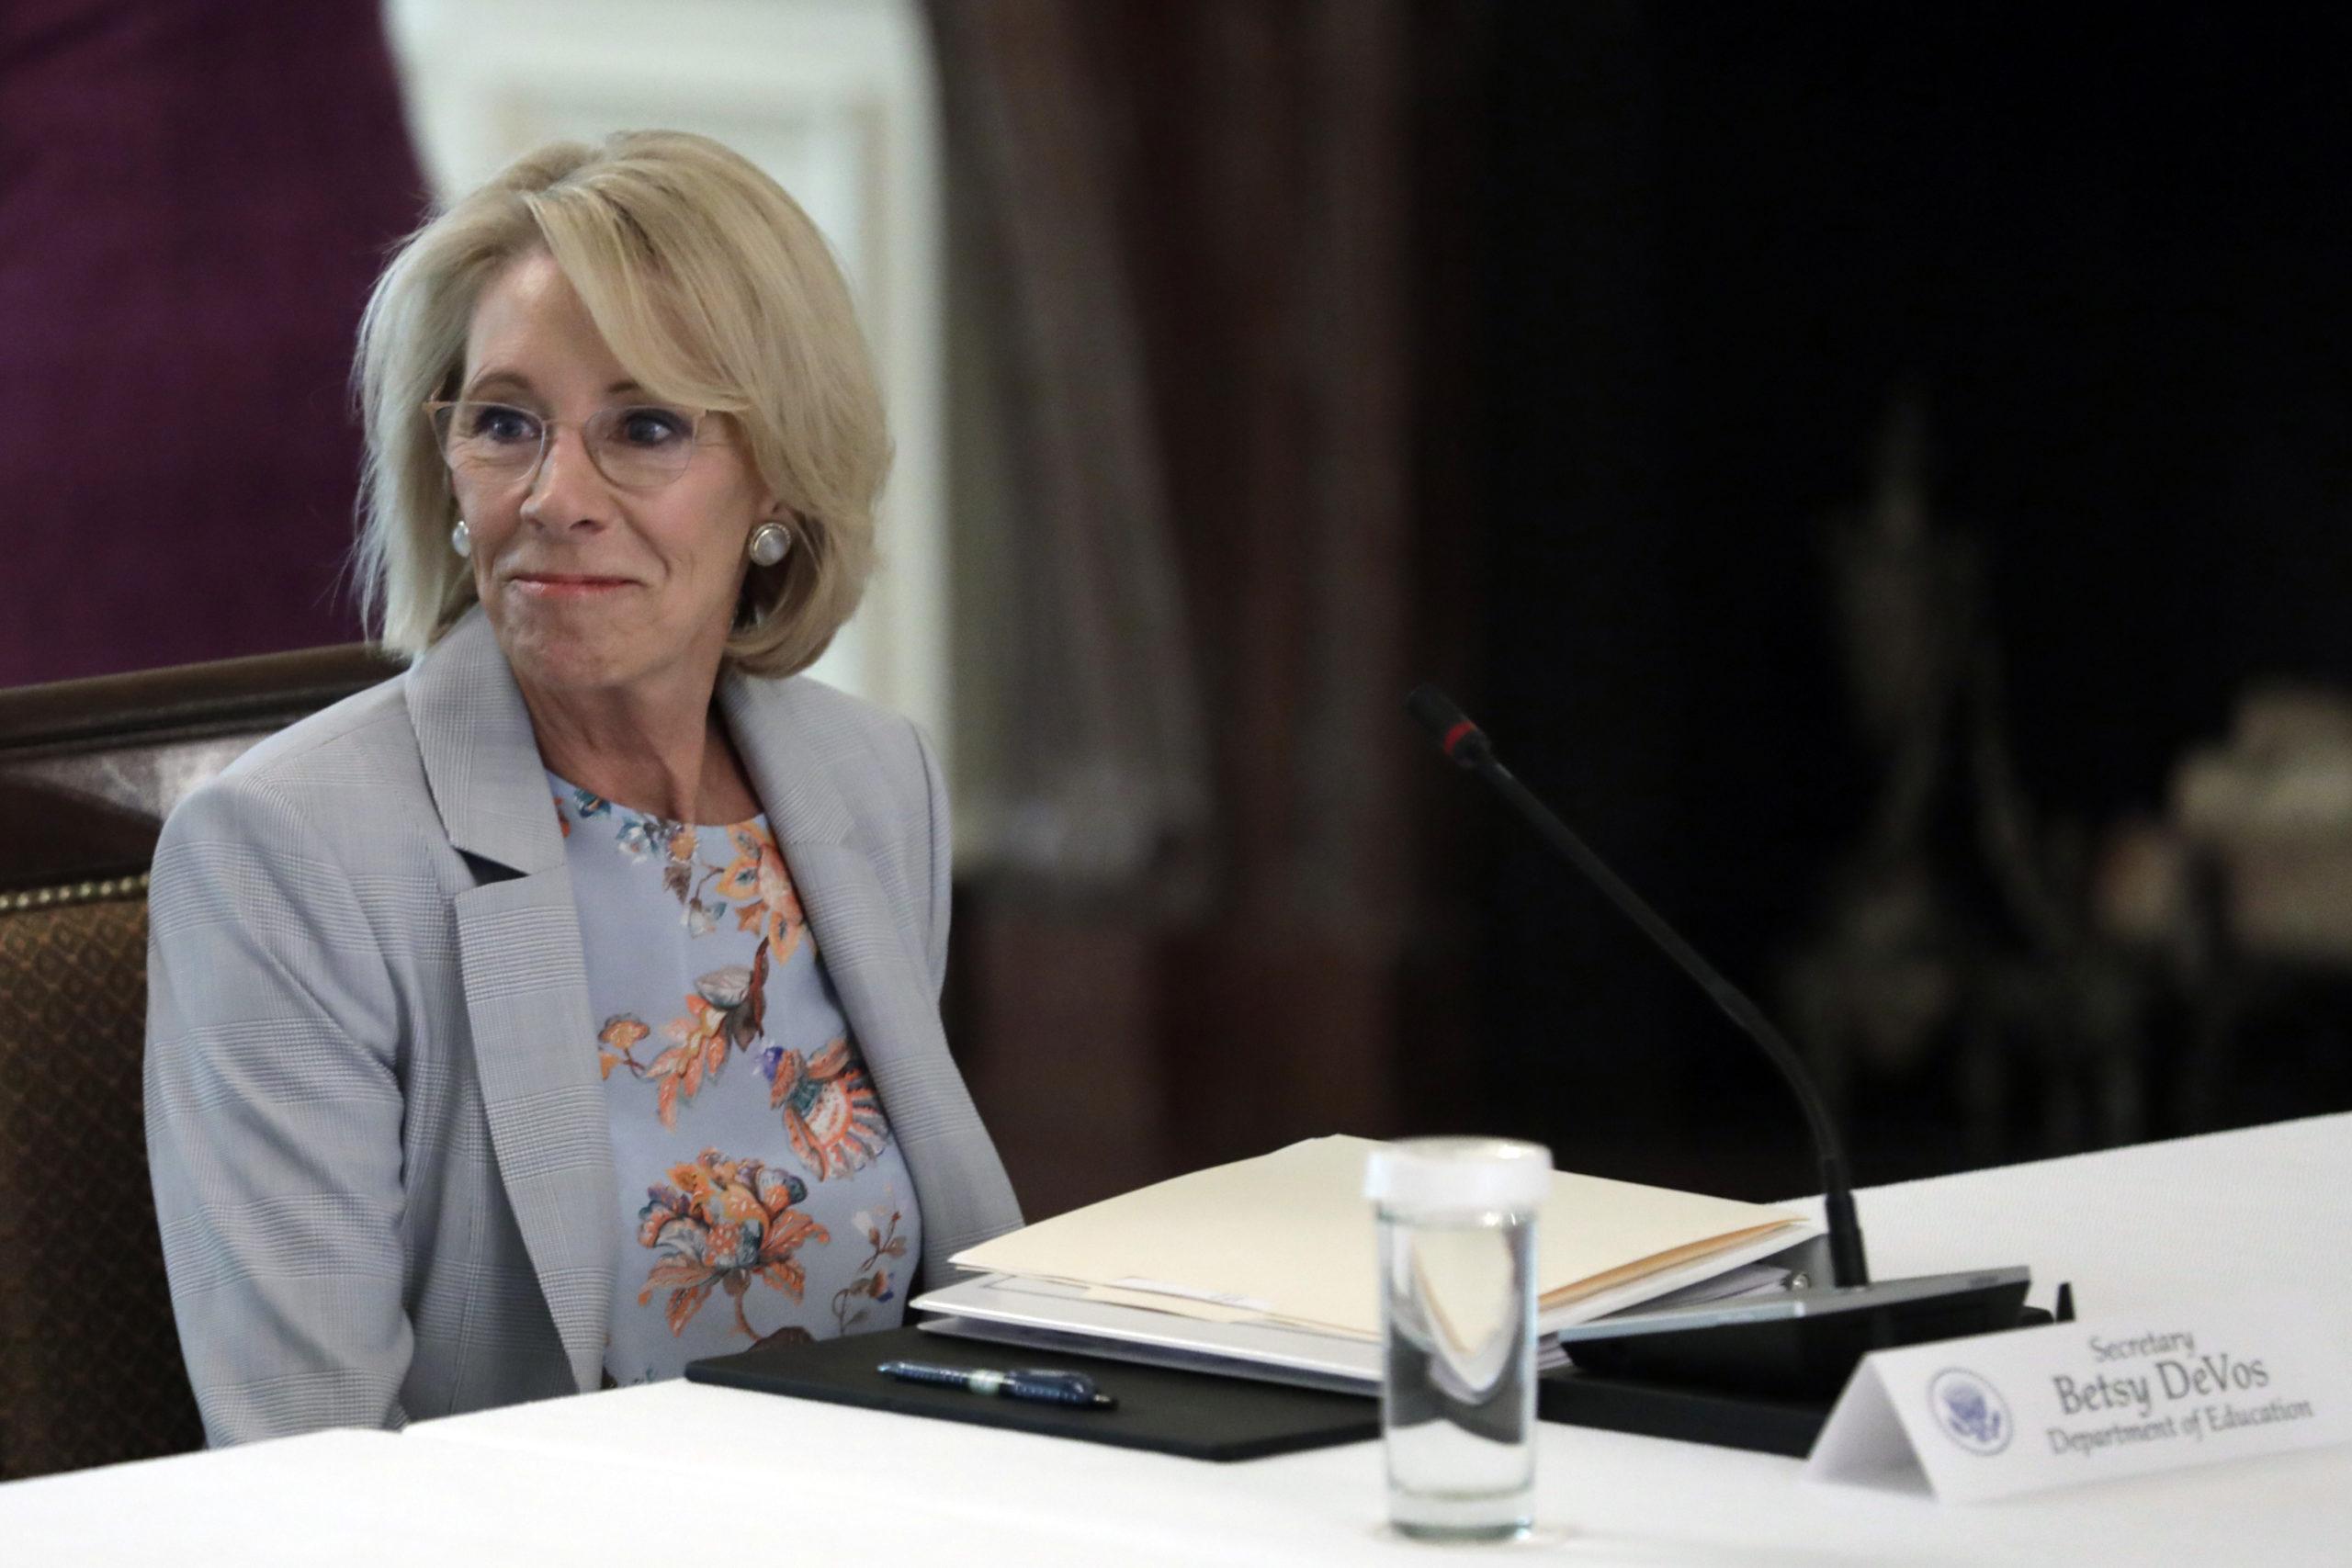 In this file photo, U.S. Education Secretary Betsy DeVos attends the American Workforce Policy Advisory Board Meeting at the White House in Washington, DC on June 26, 2020. DeVos encourages parents to send their kids back to school, warning of students falling behind academically without directly addressing the health risks posed by the coronavirus. (Yuri Gripas/Abaca Press/TNS)